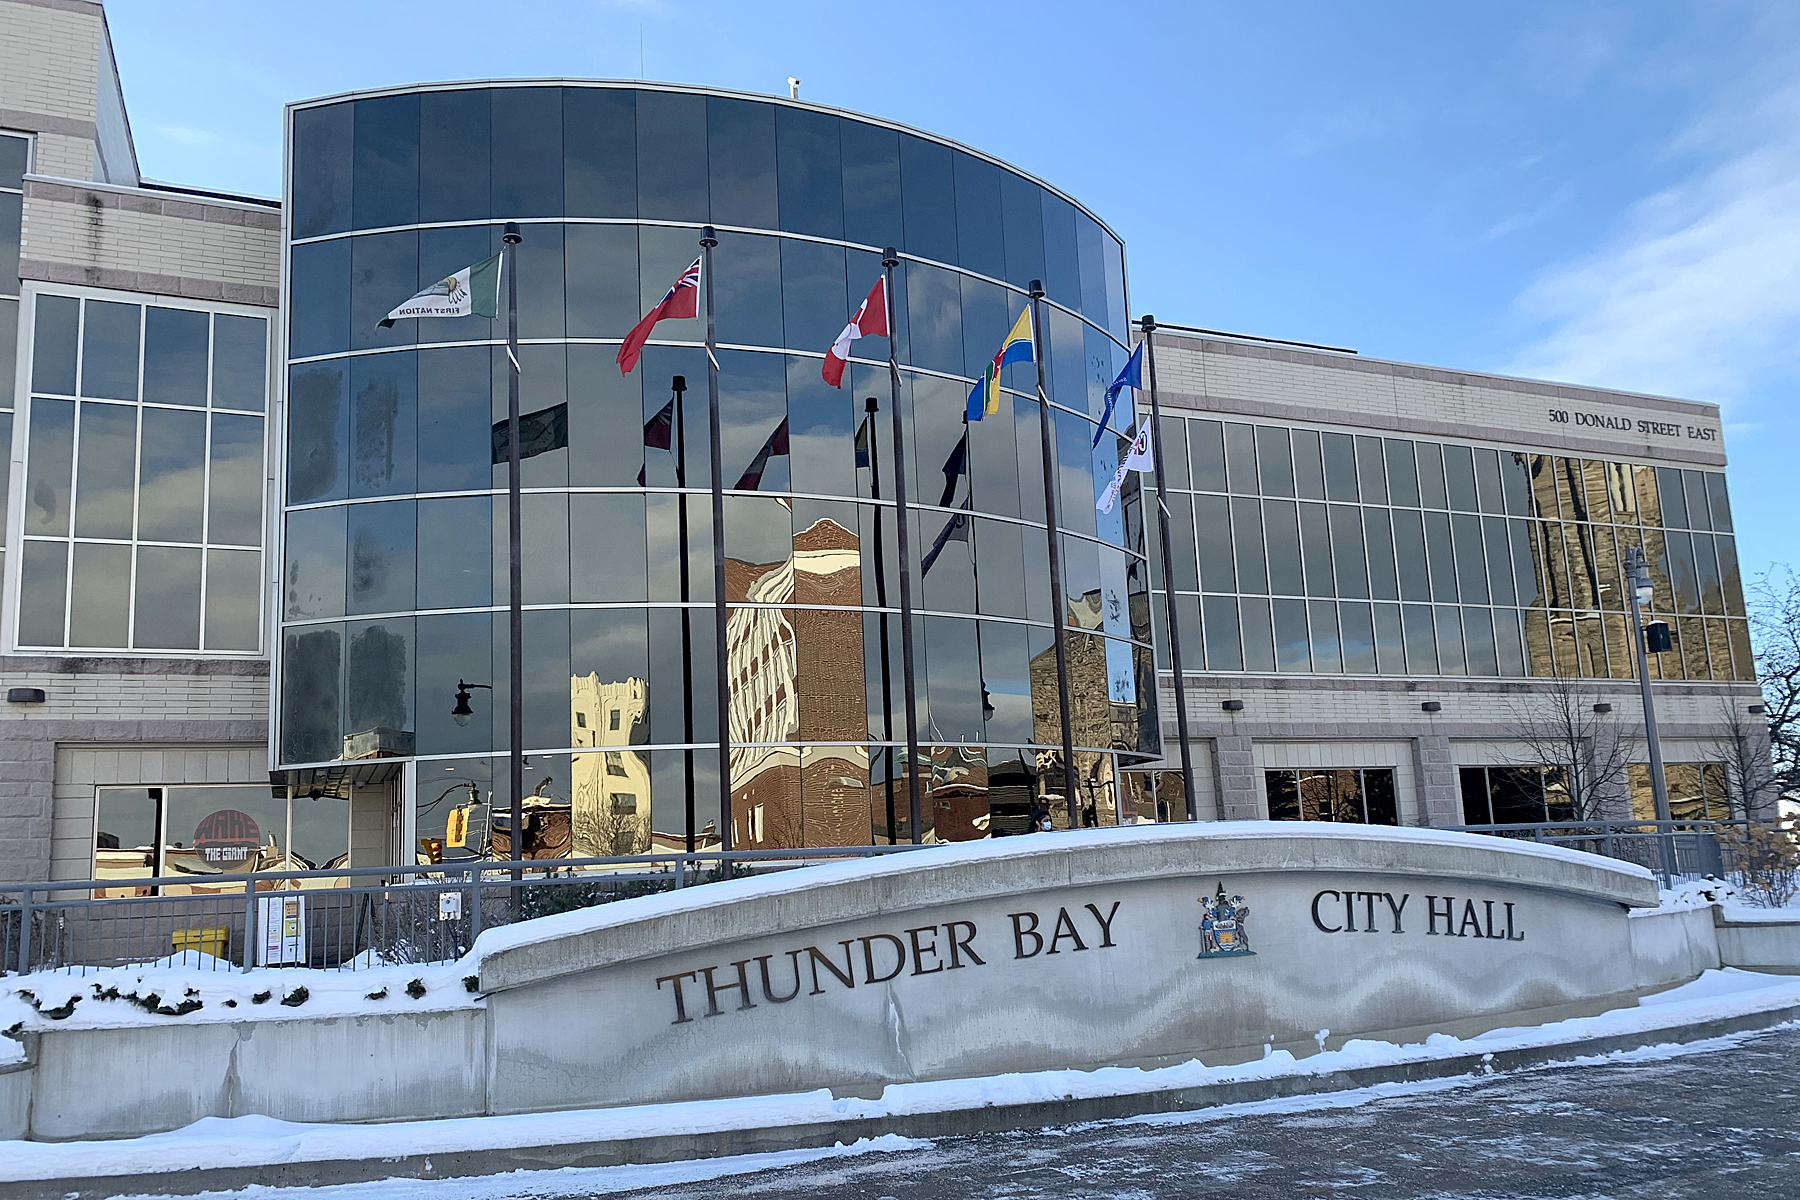 https://www.vmcdn.ca/f/files/tbnewswatch/images/local-news/2021/january/norm-gale-linda-evans-budget/thunder-bay-city-hall-2021.jpg